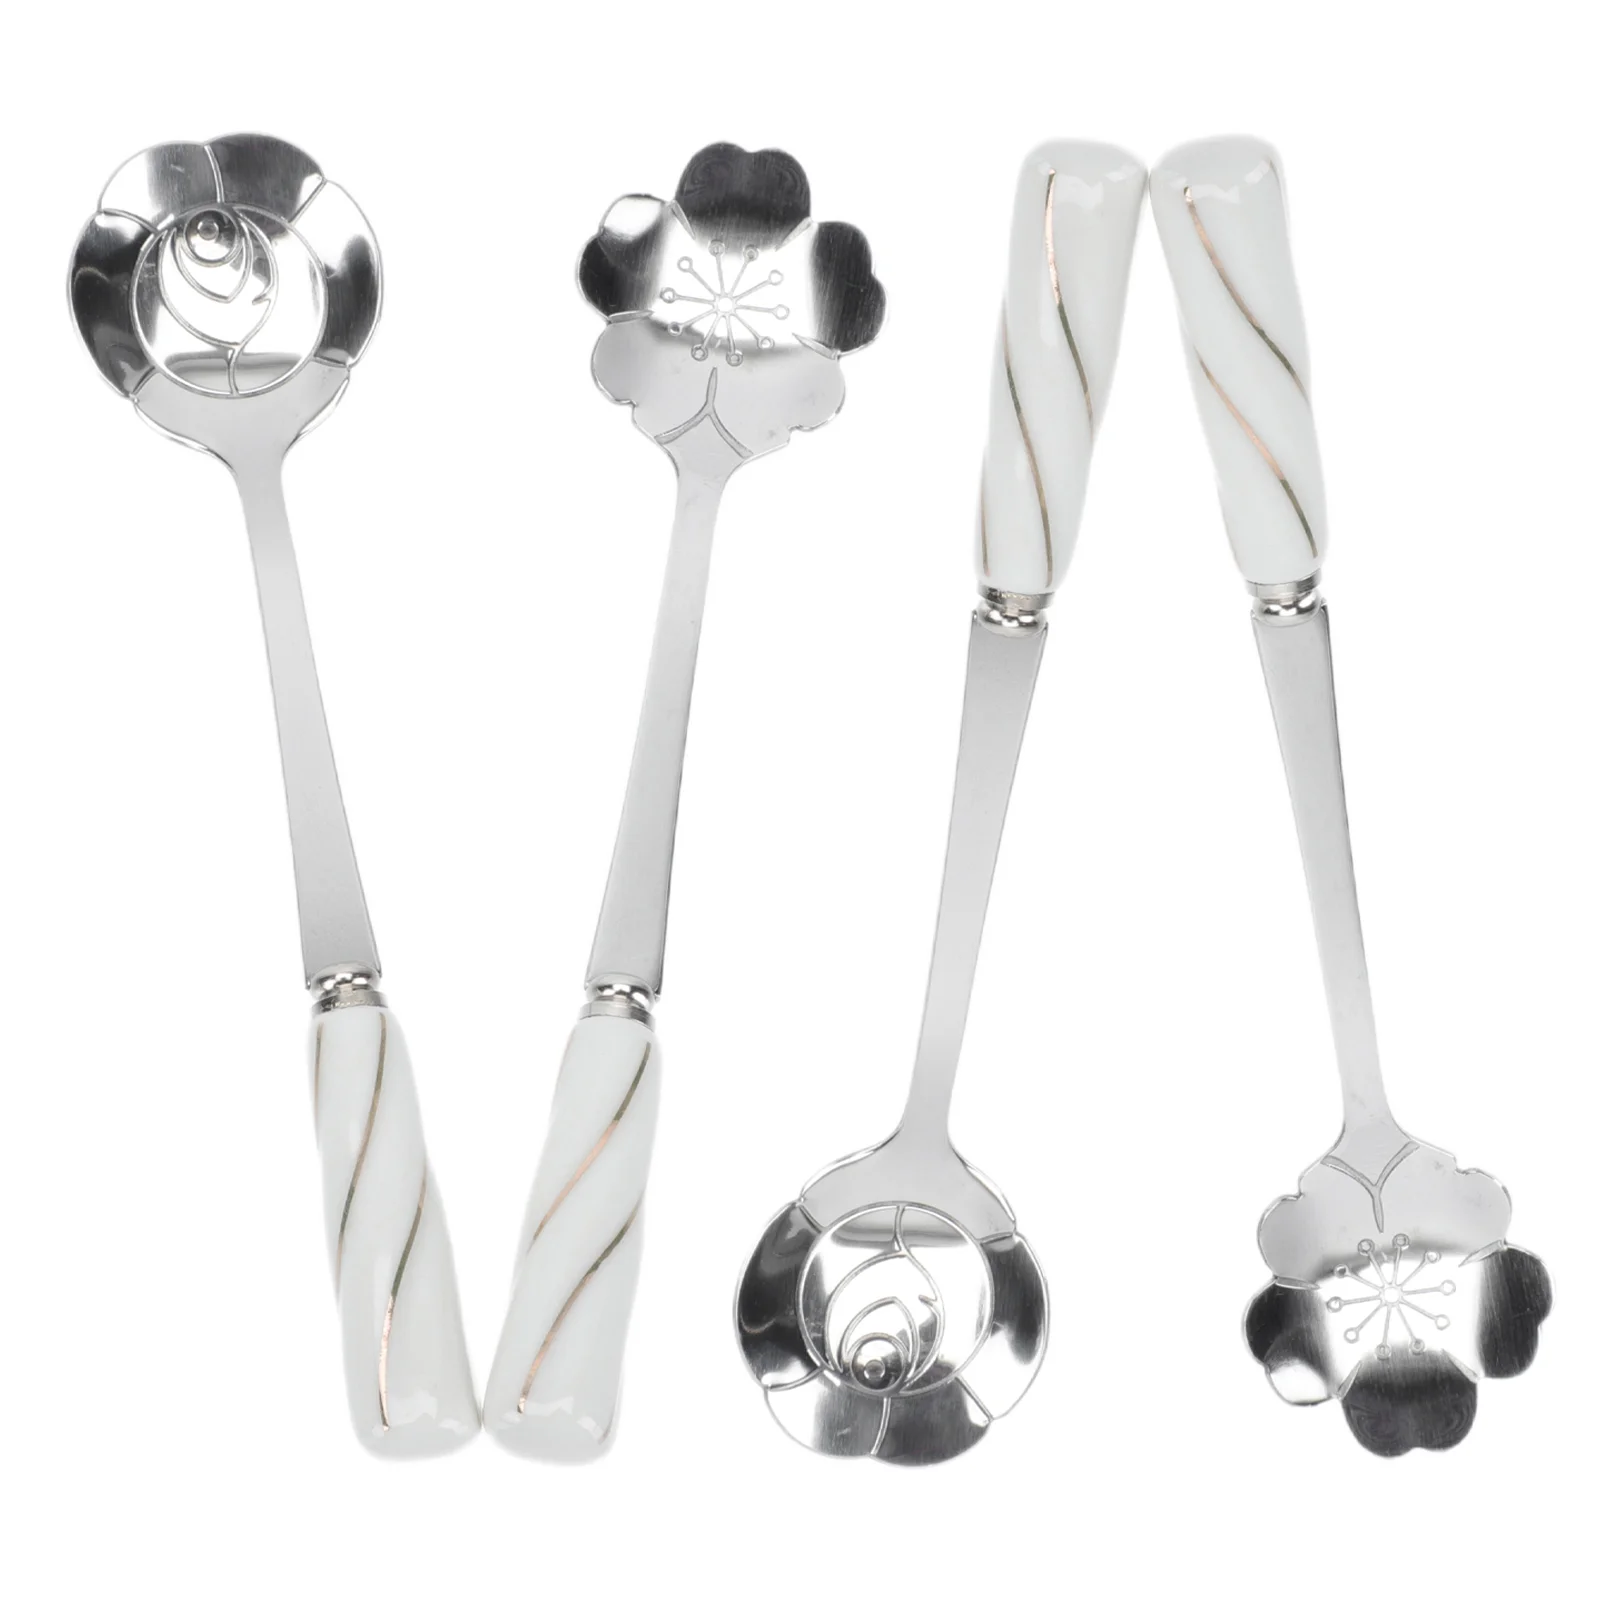 

4Pcs Stainless Steel Dessert Spoons Lovely Coffee Spoons Useful Cake Spoons